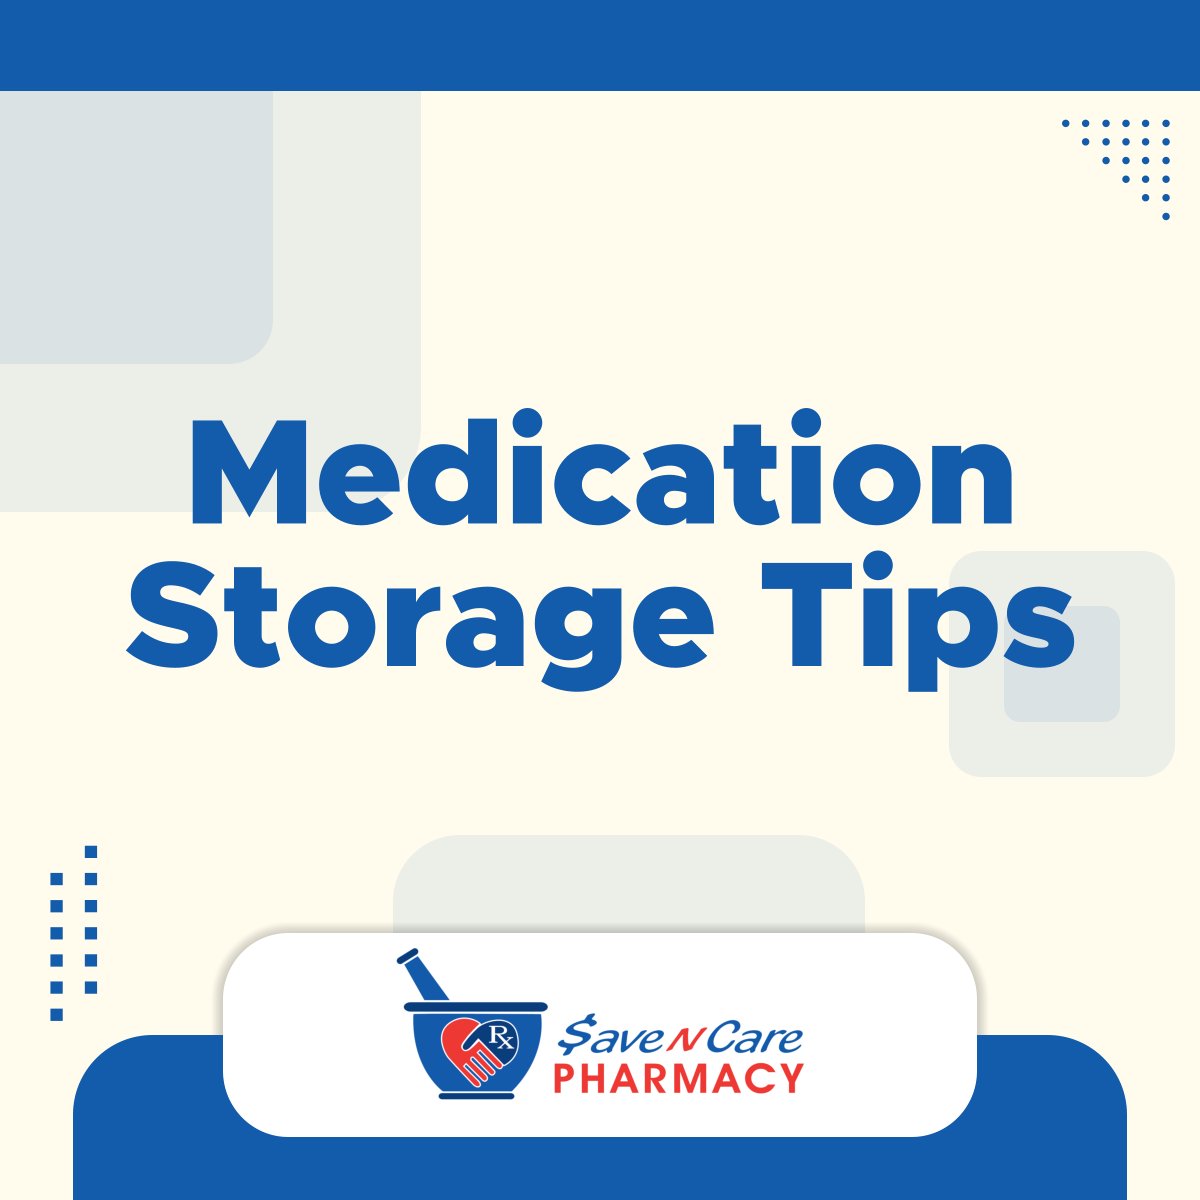 Store them in a cool, dry place, away from sunlight and moisture, and in their original packaging. Store them out of reach and ask a pharmacist for guidance on any specific concerns.

#PharmacyServices #HudsonFL #Medication #StorageTips